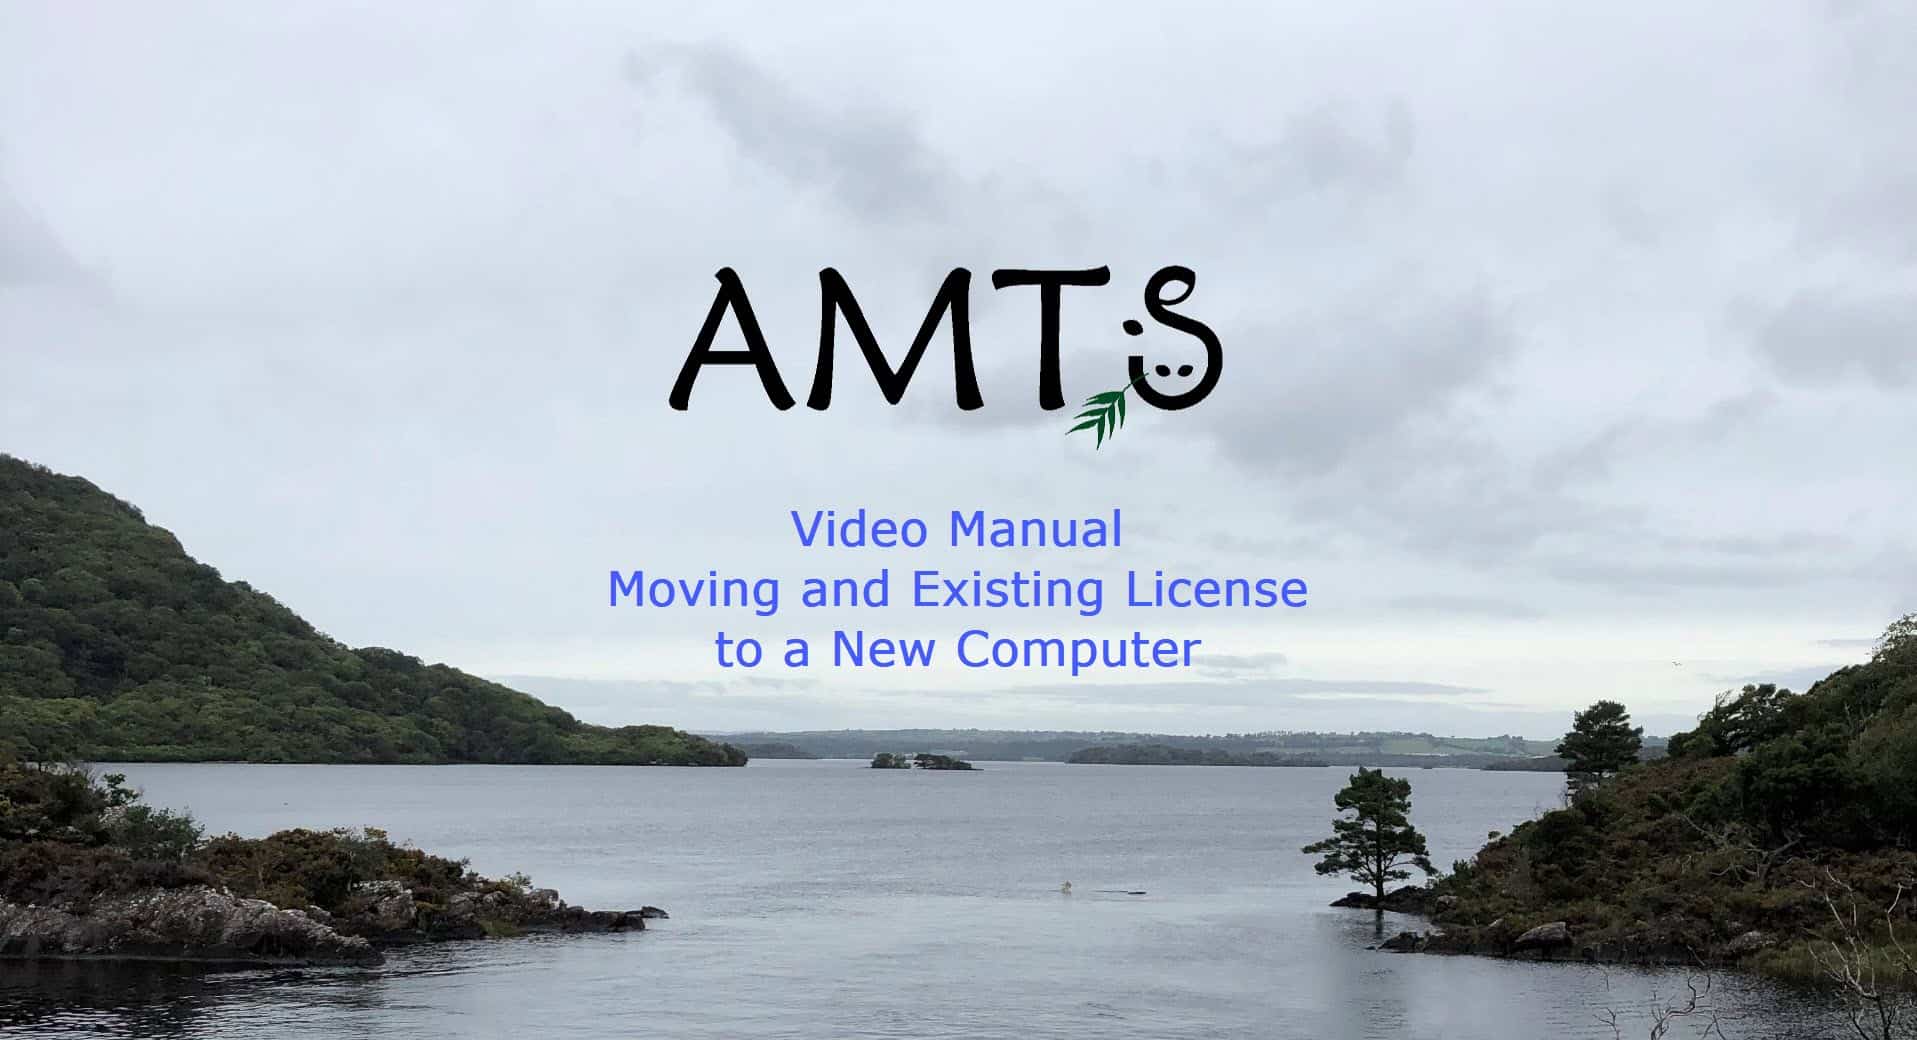 AMTS.Farm Video Manual–Moving the program to a new computer